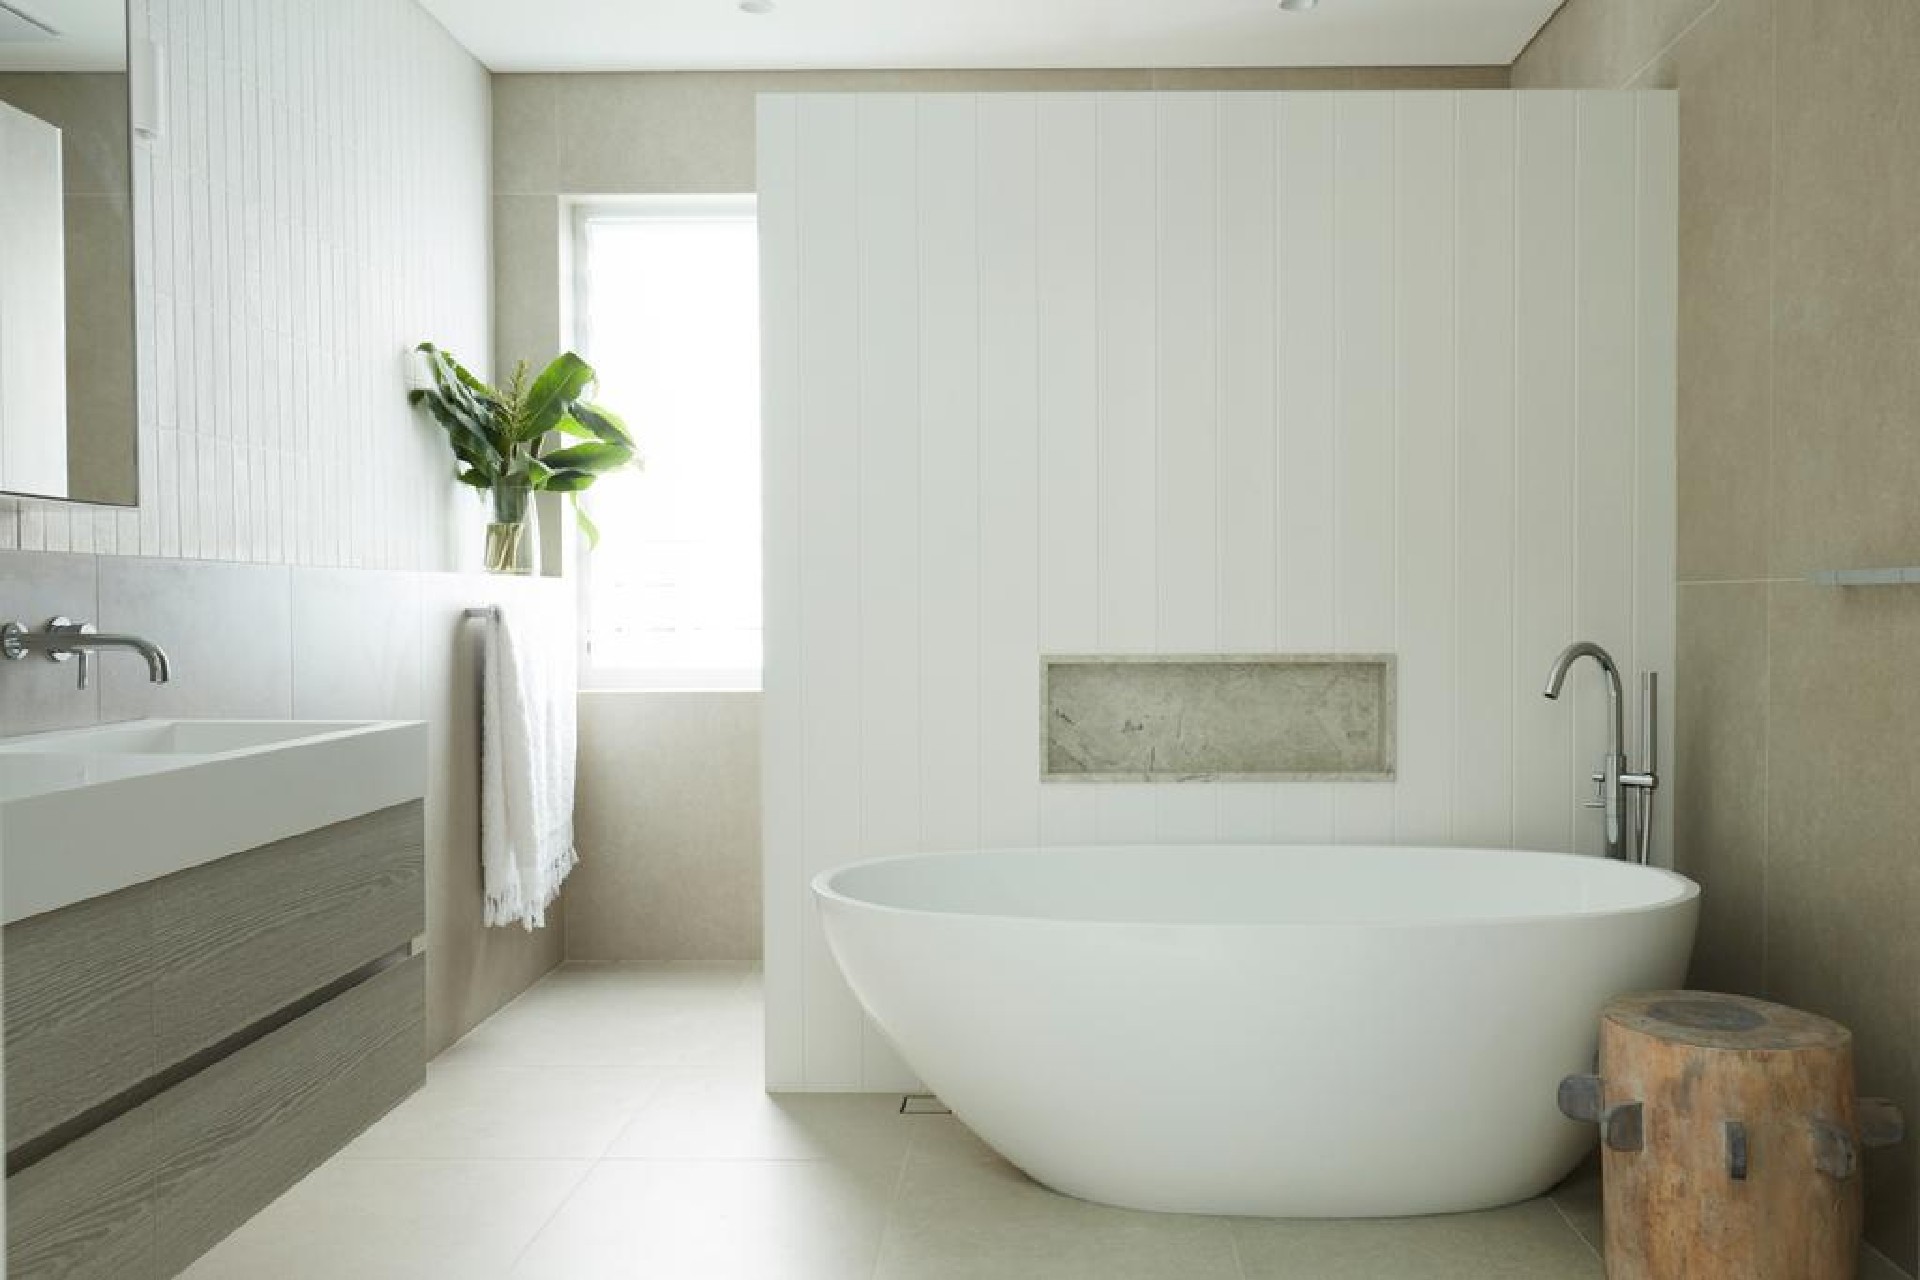 Secrets to marrying style, eco-sense and luxury in any bathroom